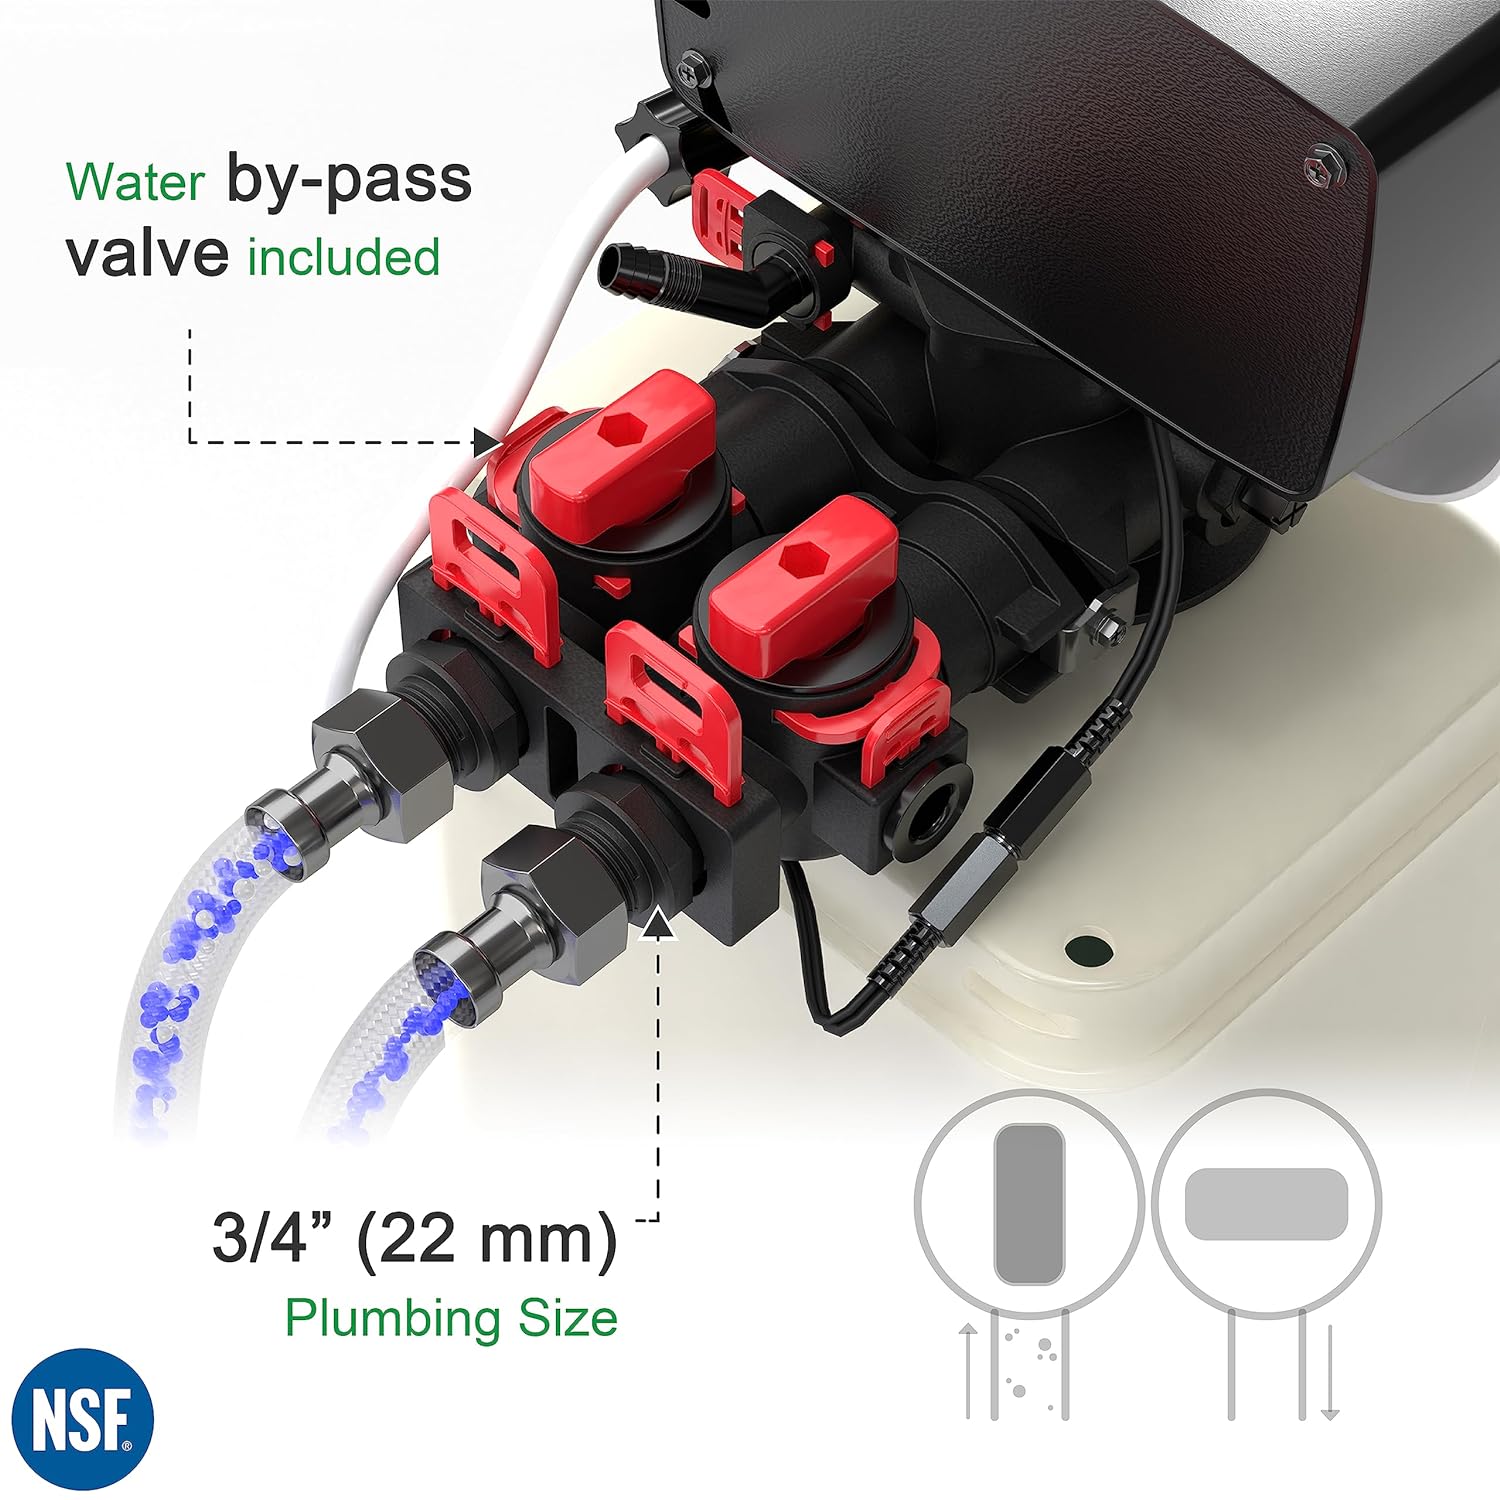 Water Softener Features